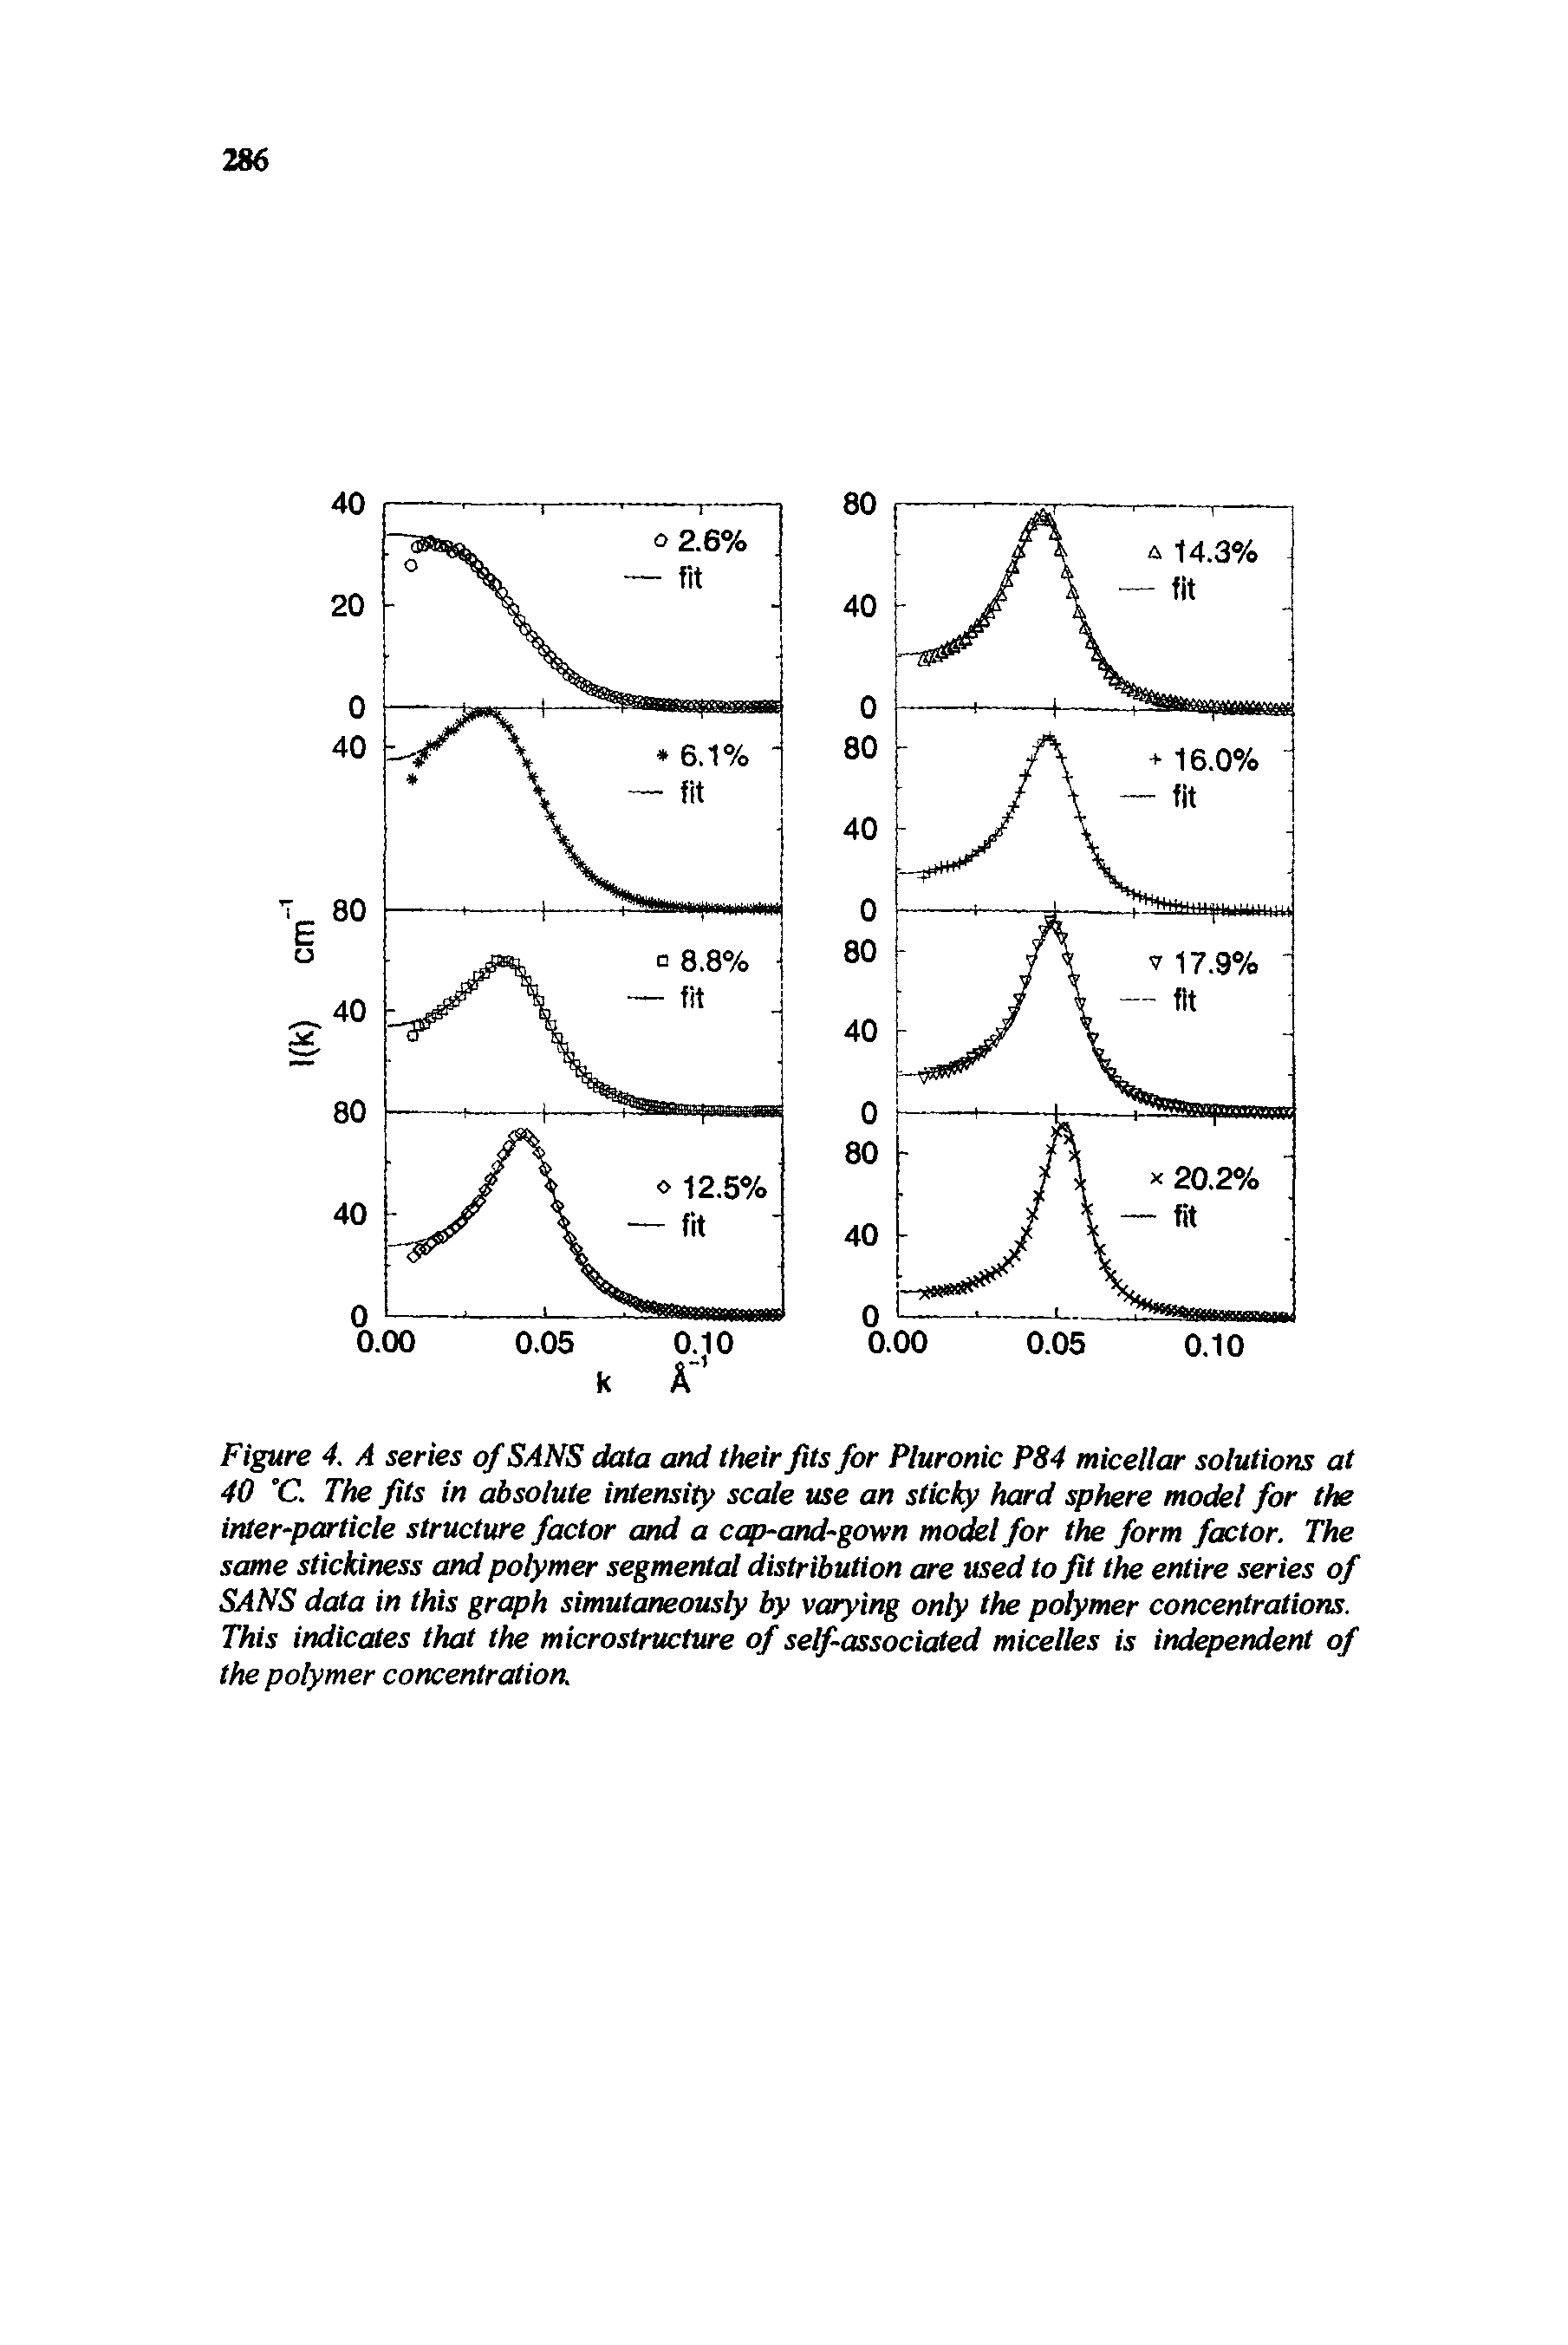 Figure 4. A series of SANS data and their fits for Pluronic P84 micellar solutions at 40 C. The fits in absolute intensity scale use an sticky hard sphere model for the inter-particle structure factor and a ctp-and-gown model for the form factor. The same stickiness and polymer segmental distribution are used to fit the entire series of SANS data in this graph simutaneously by varying only the polymer concentrations. This indicates that the microstructure of self-associated micelles is independent of the polymer concentration.